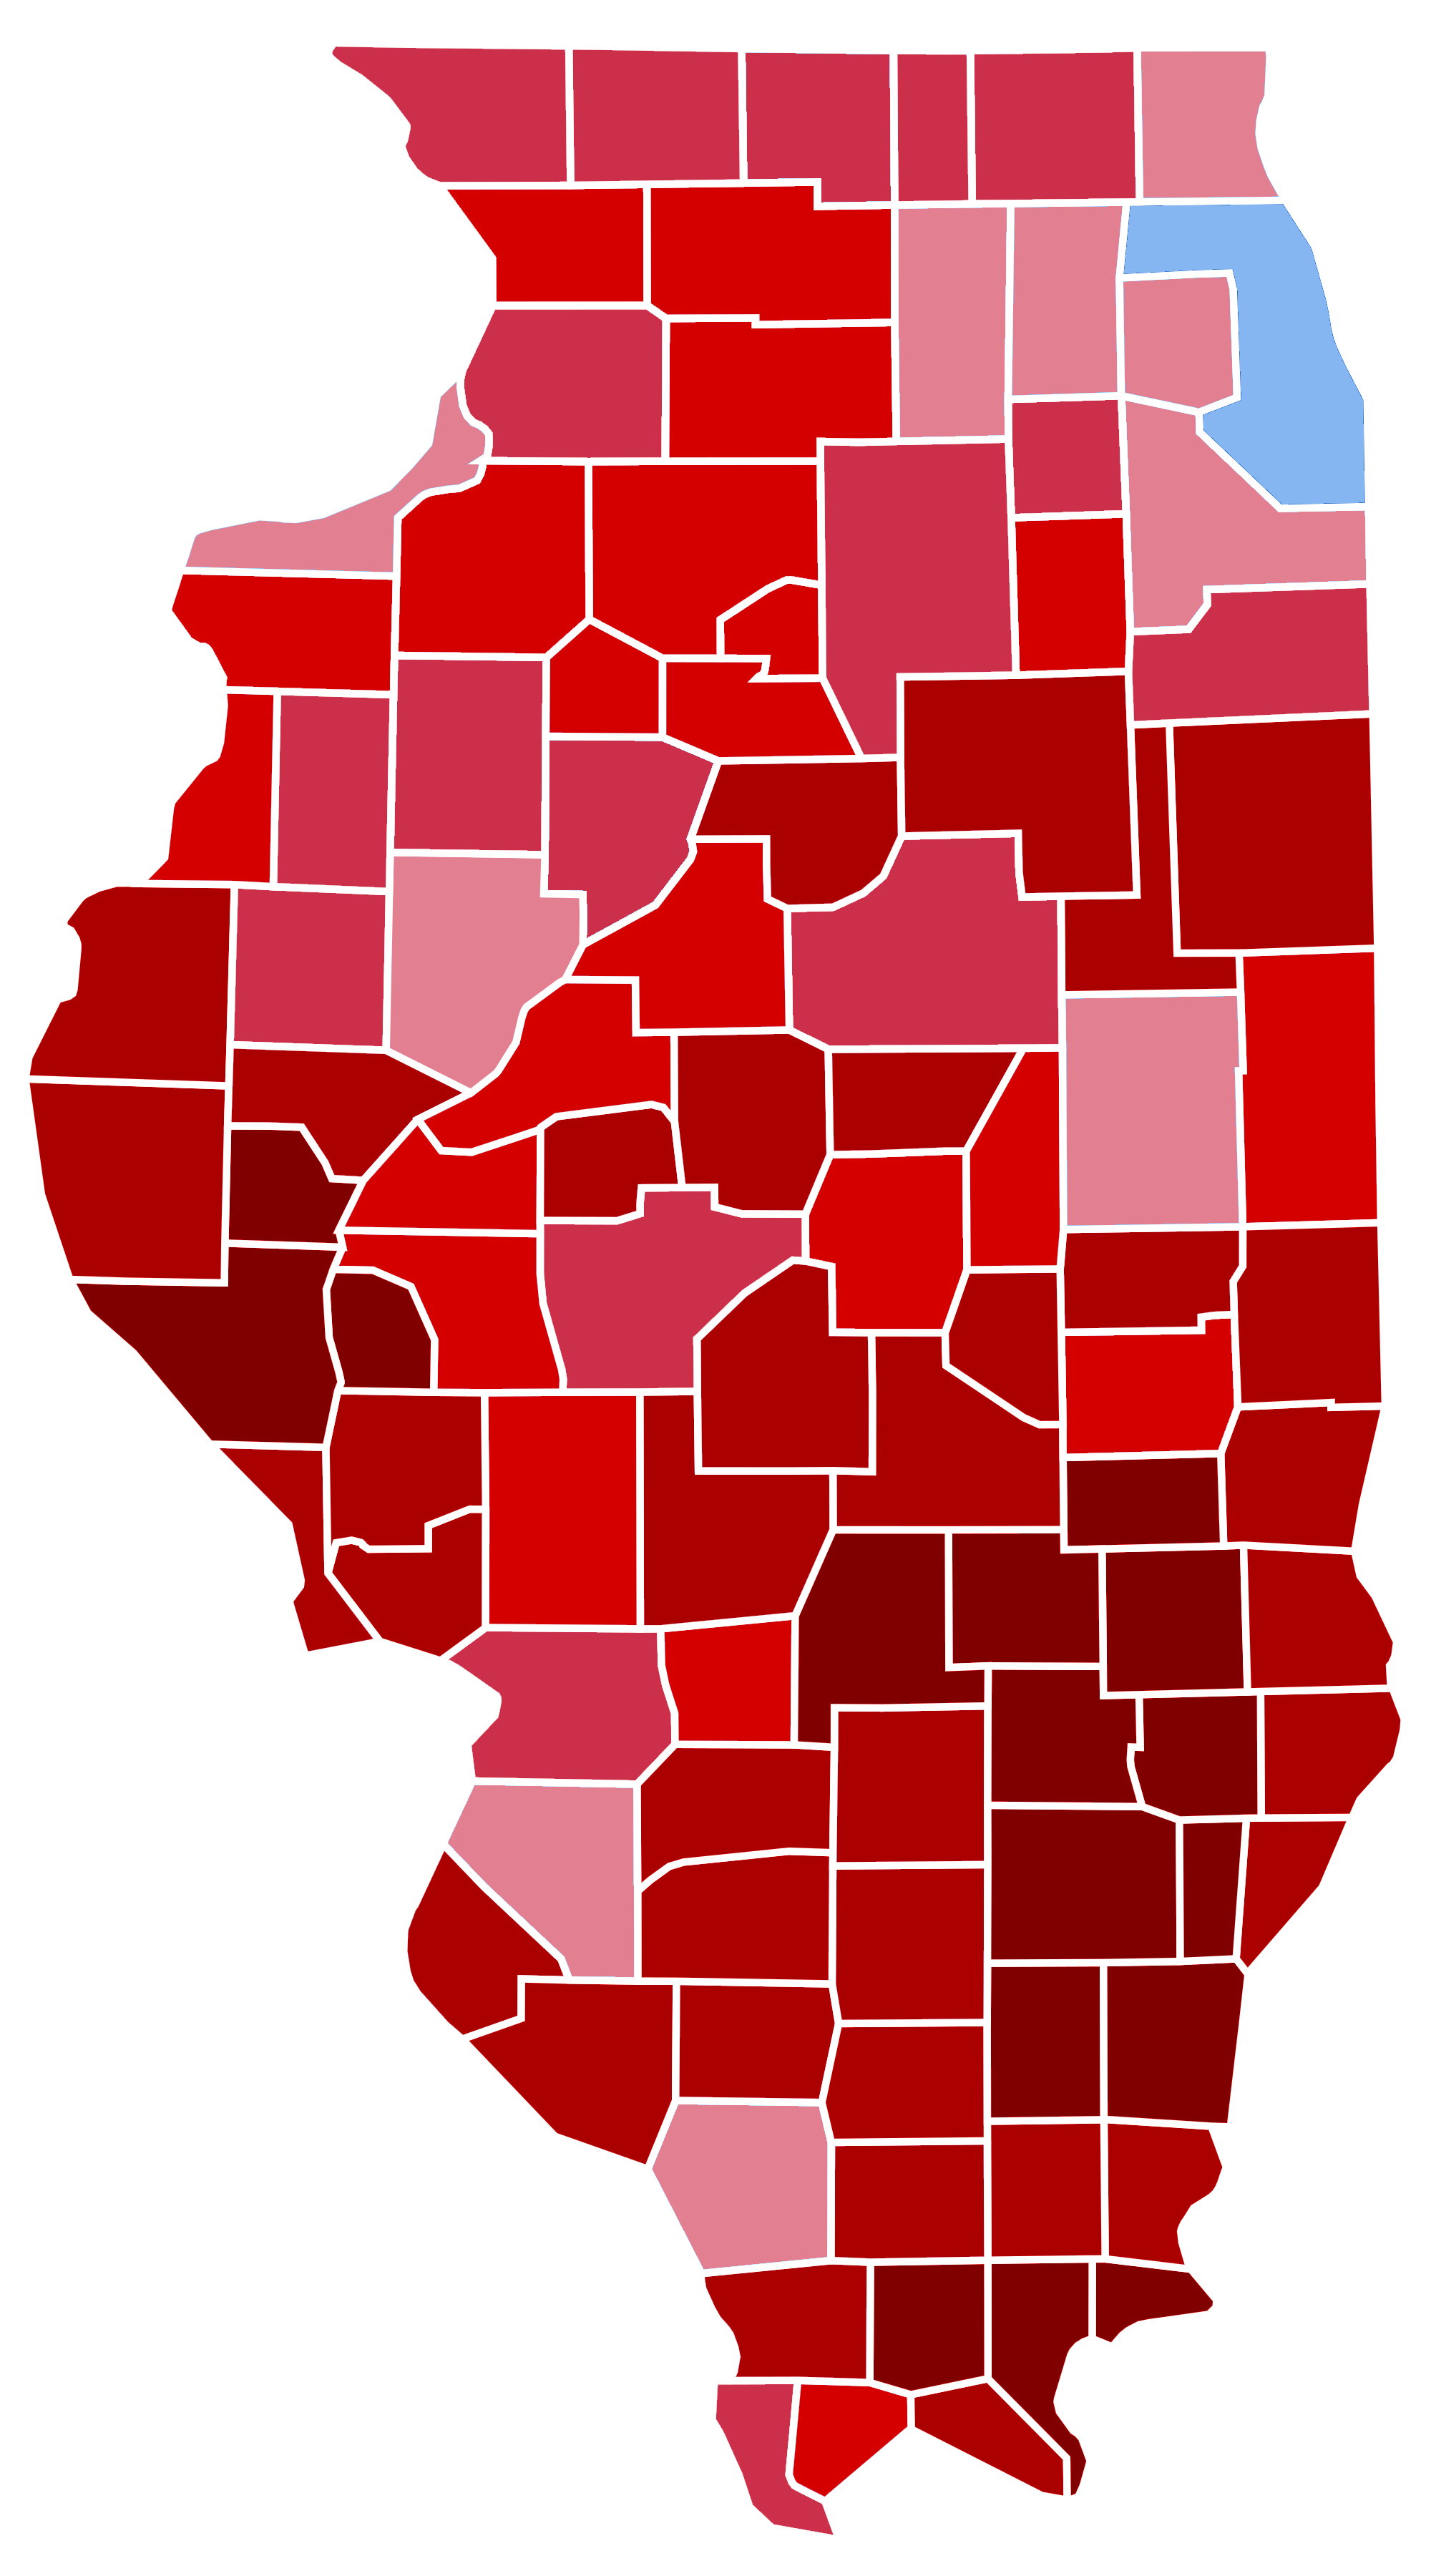 Illinois_Presidential_Election_Results_2016_Republican_Landslide_15.06%.png